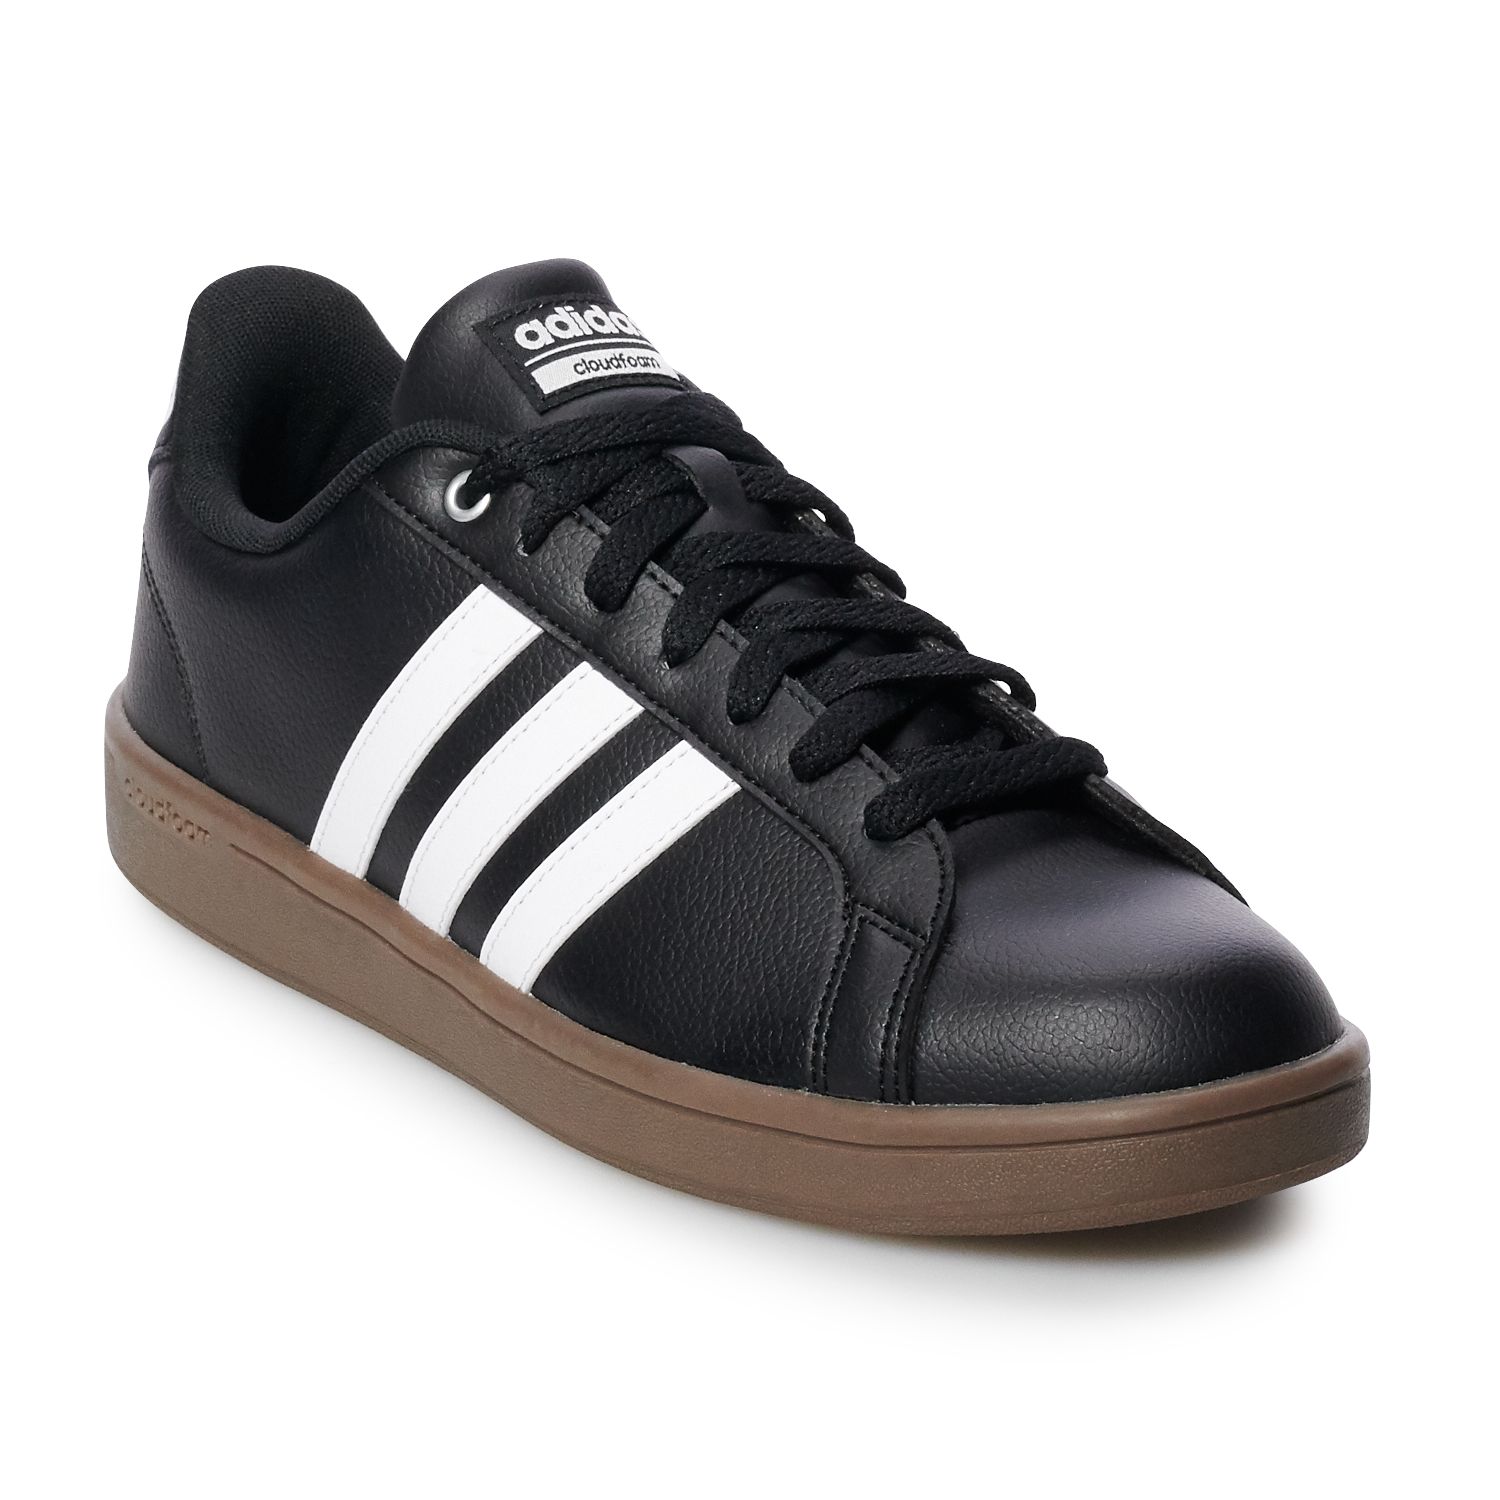 adidas advantage sneaker mens with cheap price to get top brand